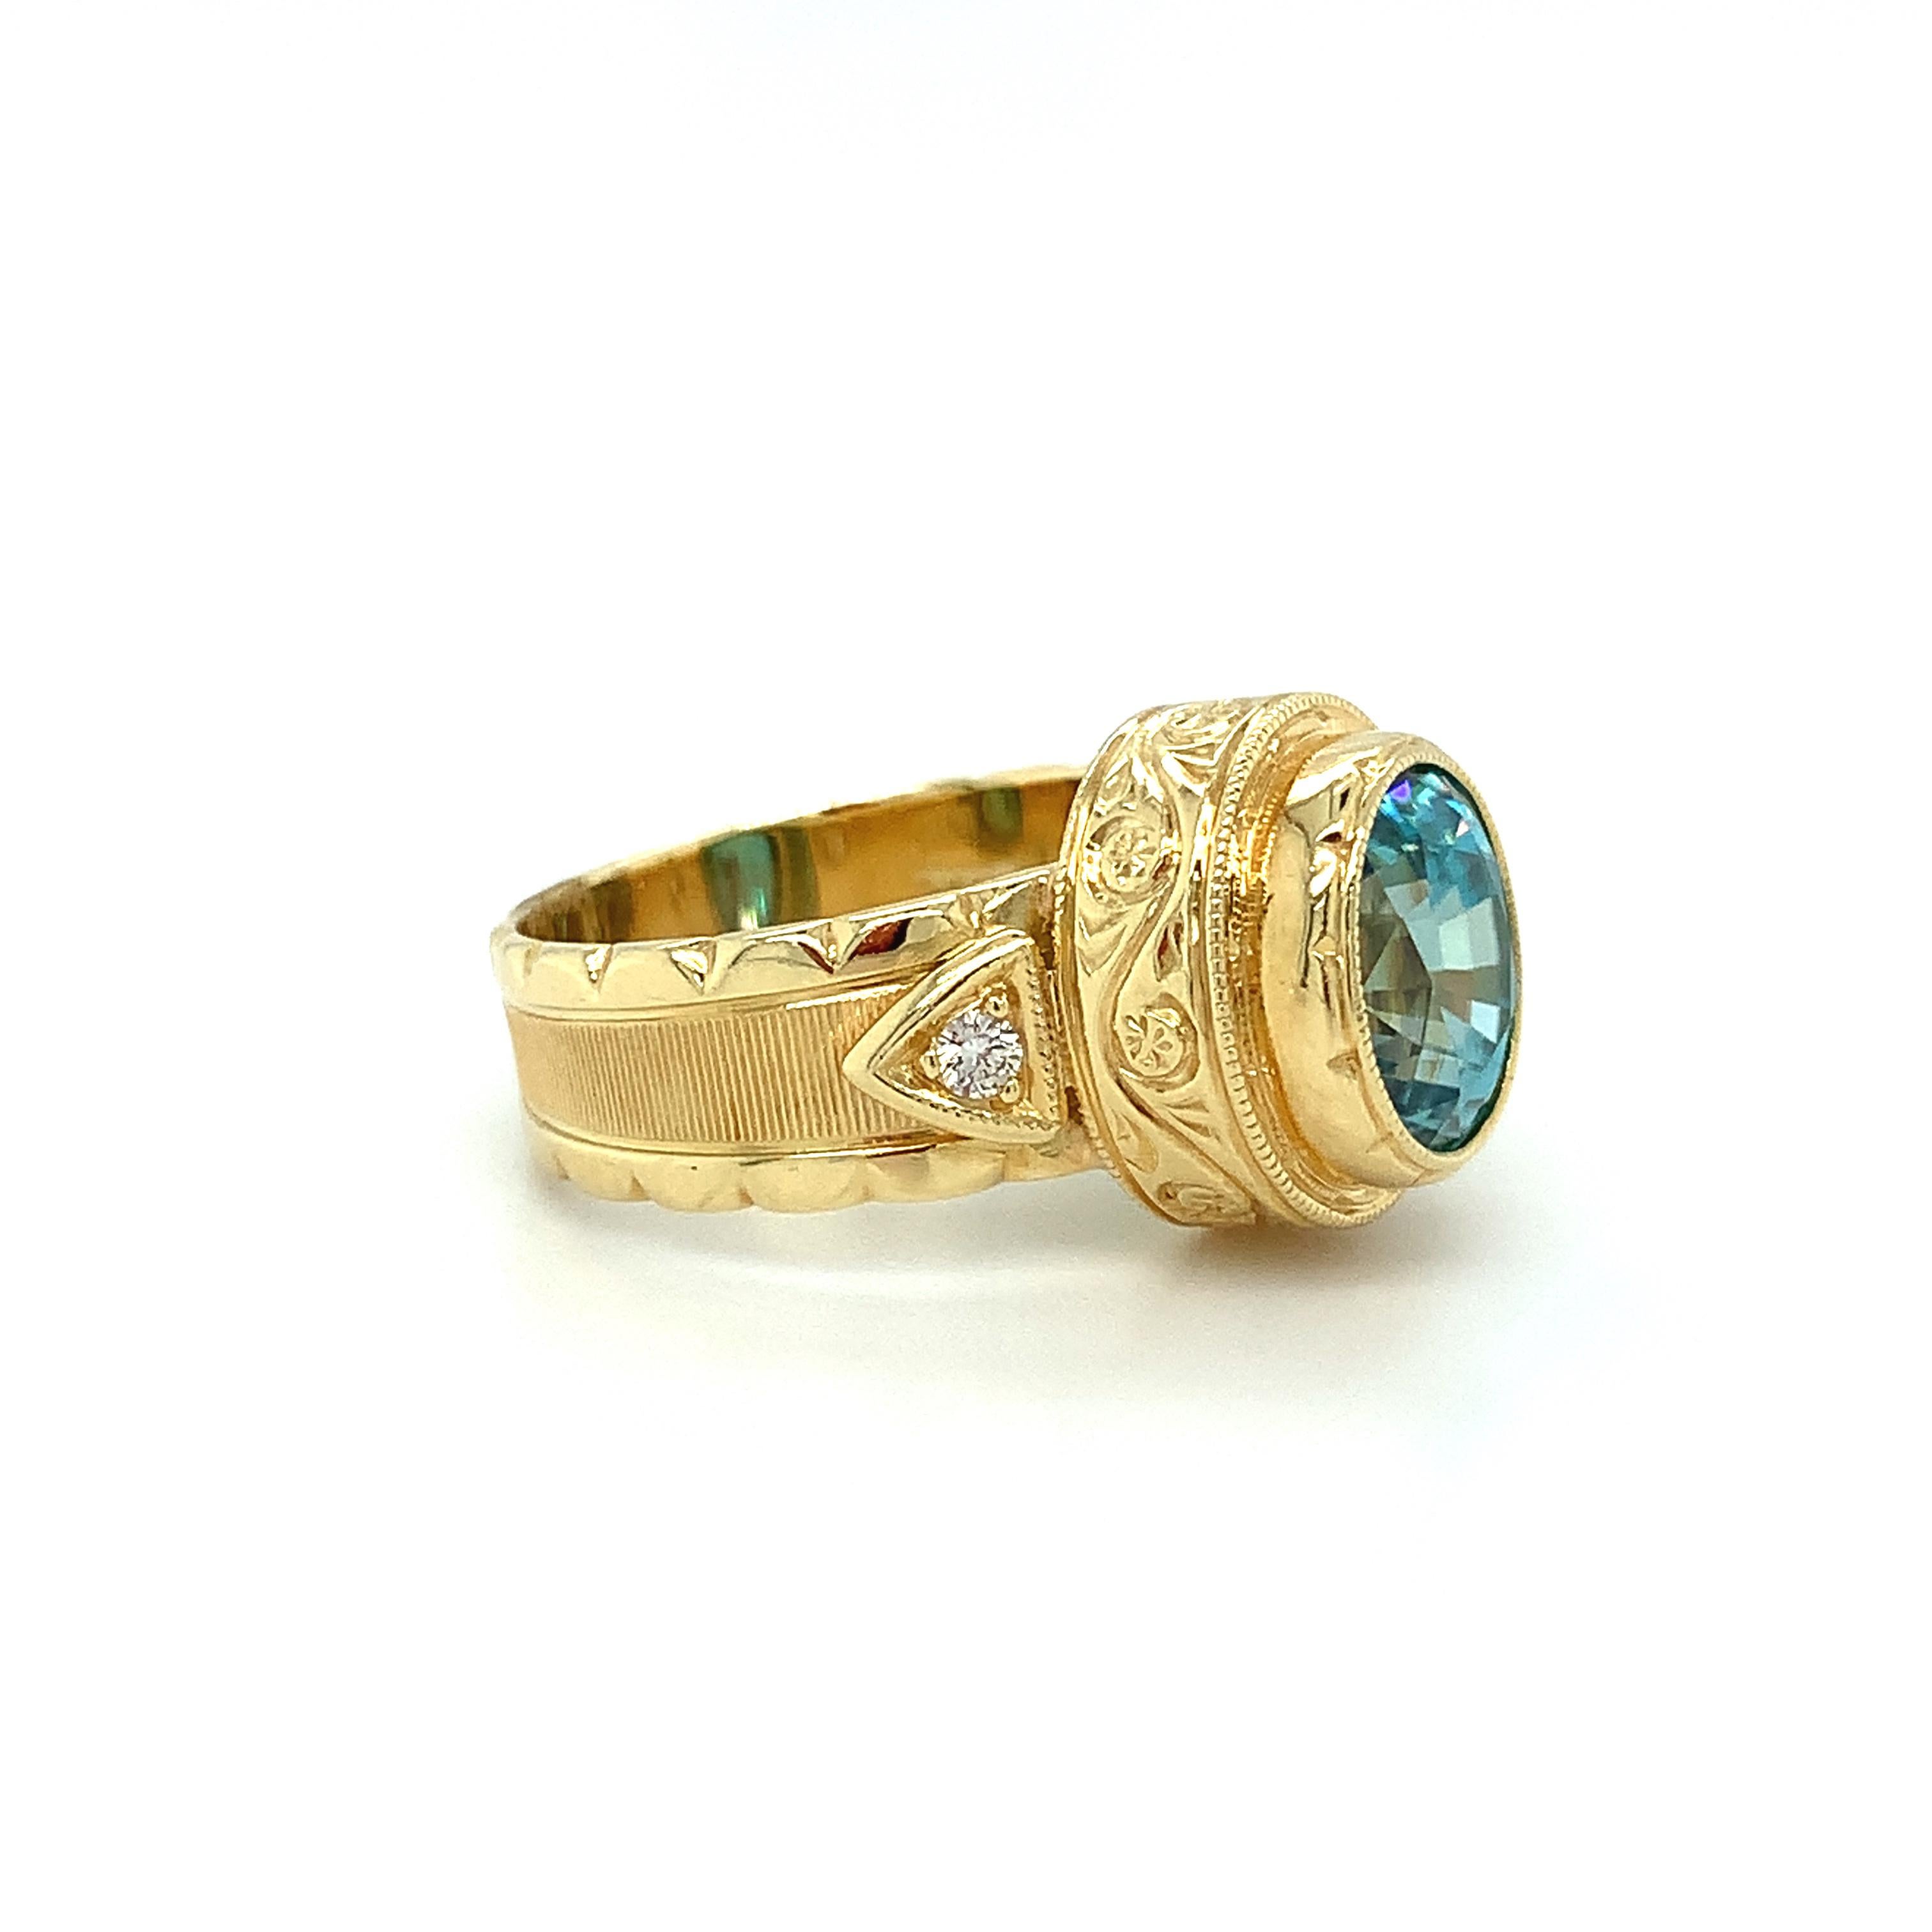 4.72 Carat Blue Zircon and Diamond Hand-Engraved Band Ring in 18k Yellow Gold   In New Condition For Sale In Los Angeles, CA